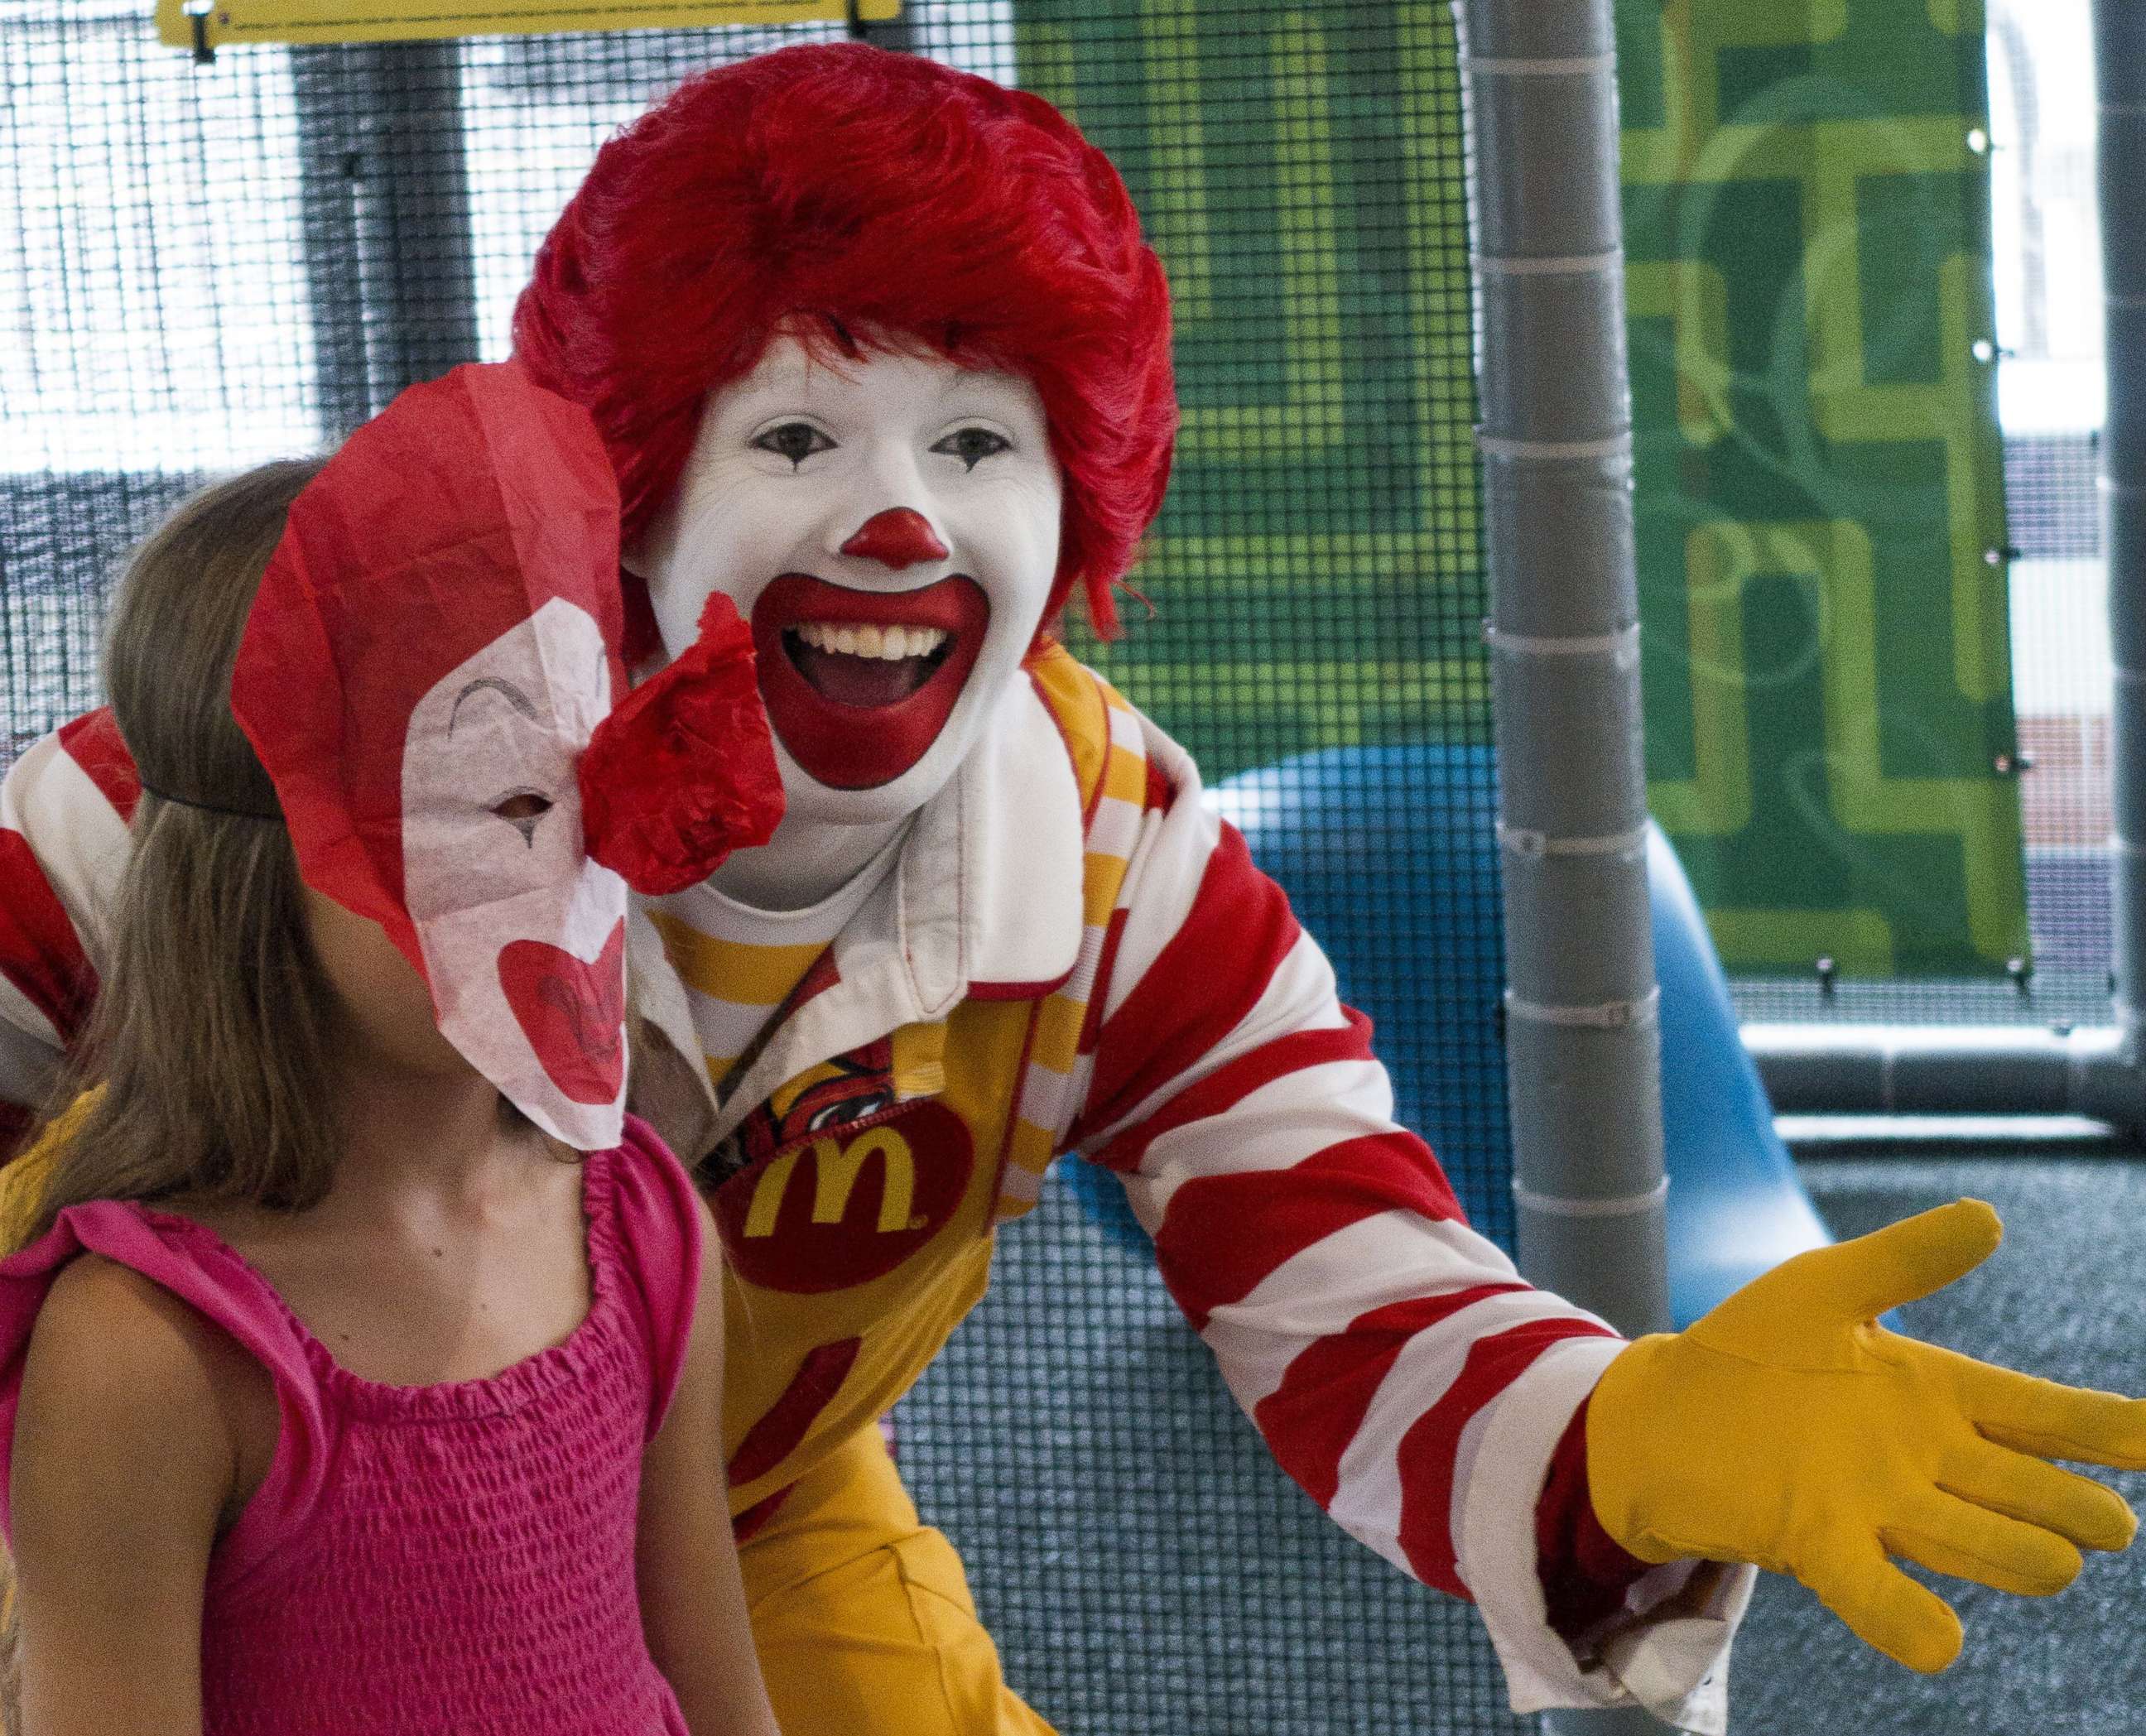 PHOTO: A person dressed as Ronald McDonald entertains a young girl during his appearance at a McDonalds's Aug. 10, 2015, in Centreville, Va.